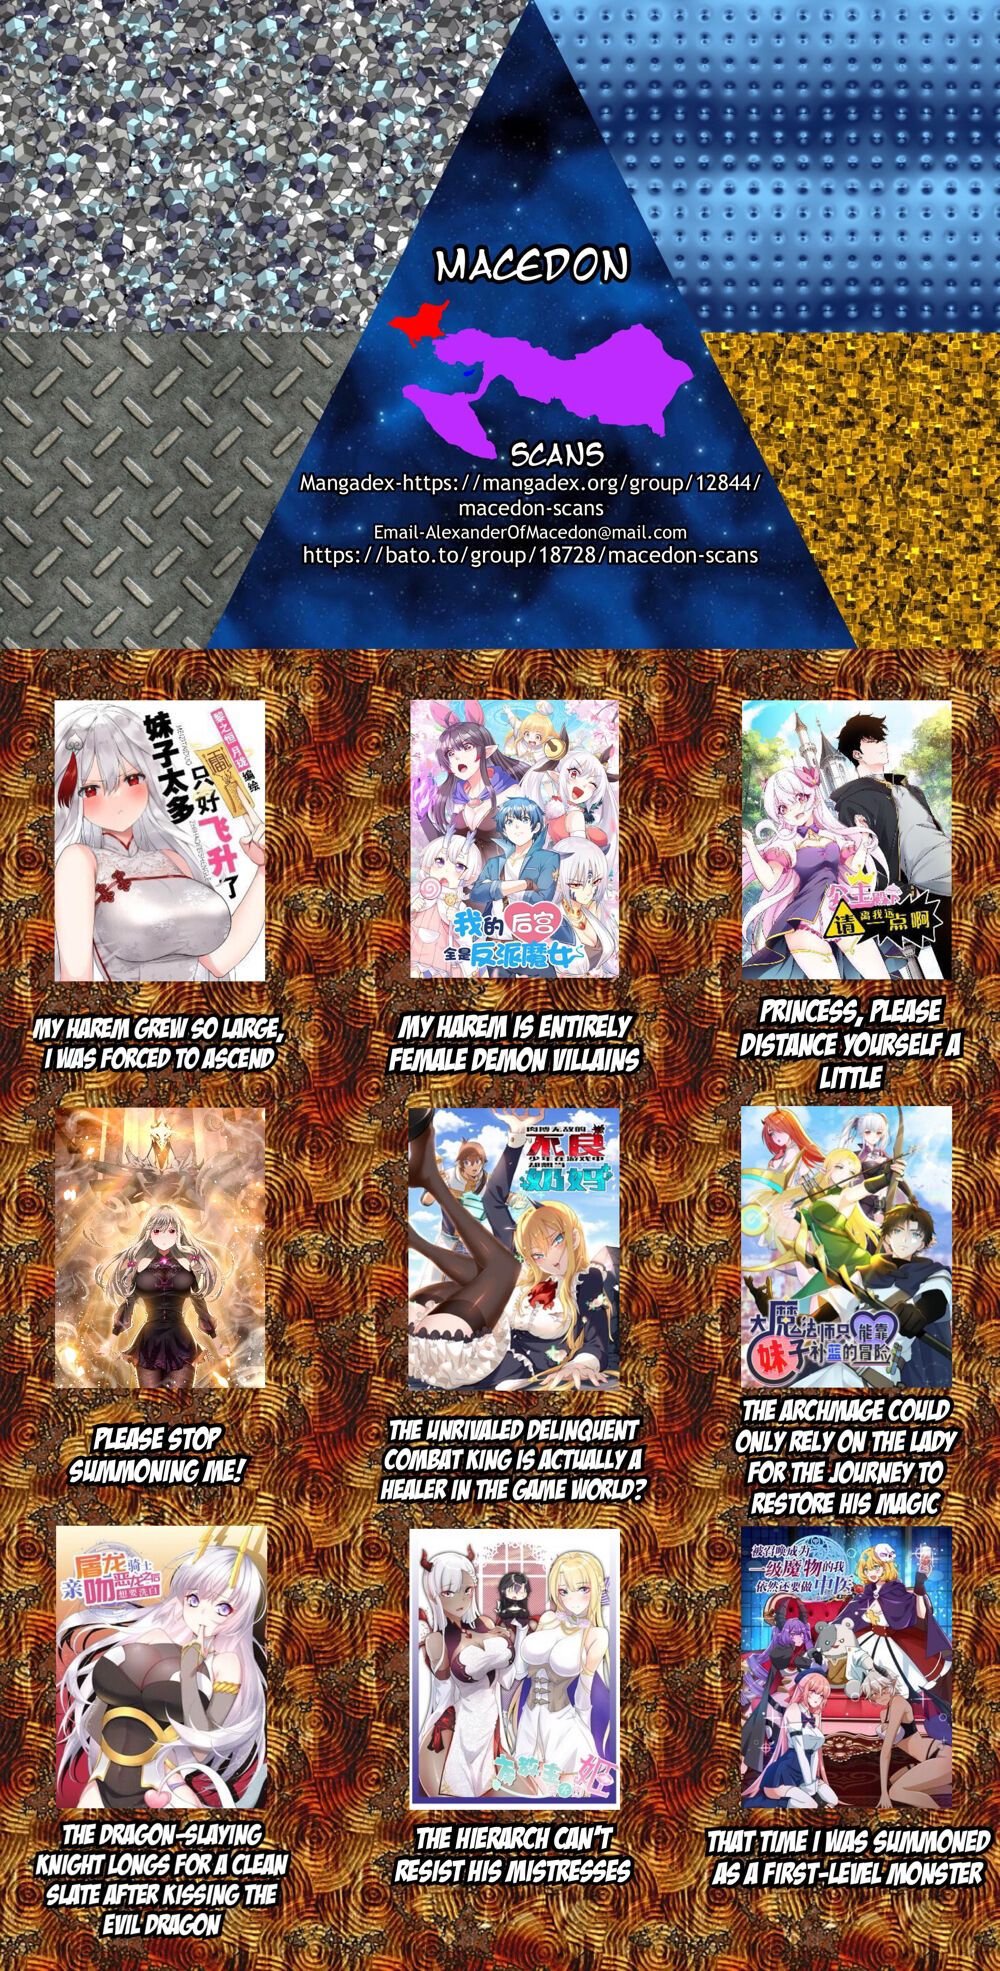 My Harem Is Entirely Female Demon Villains chapter 20